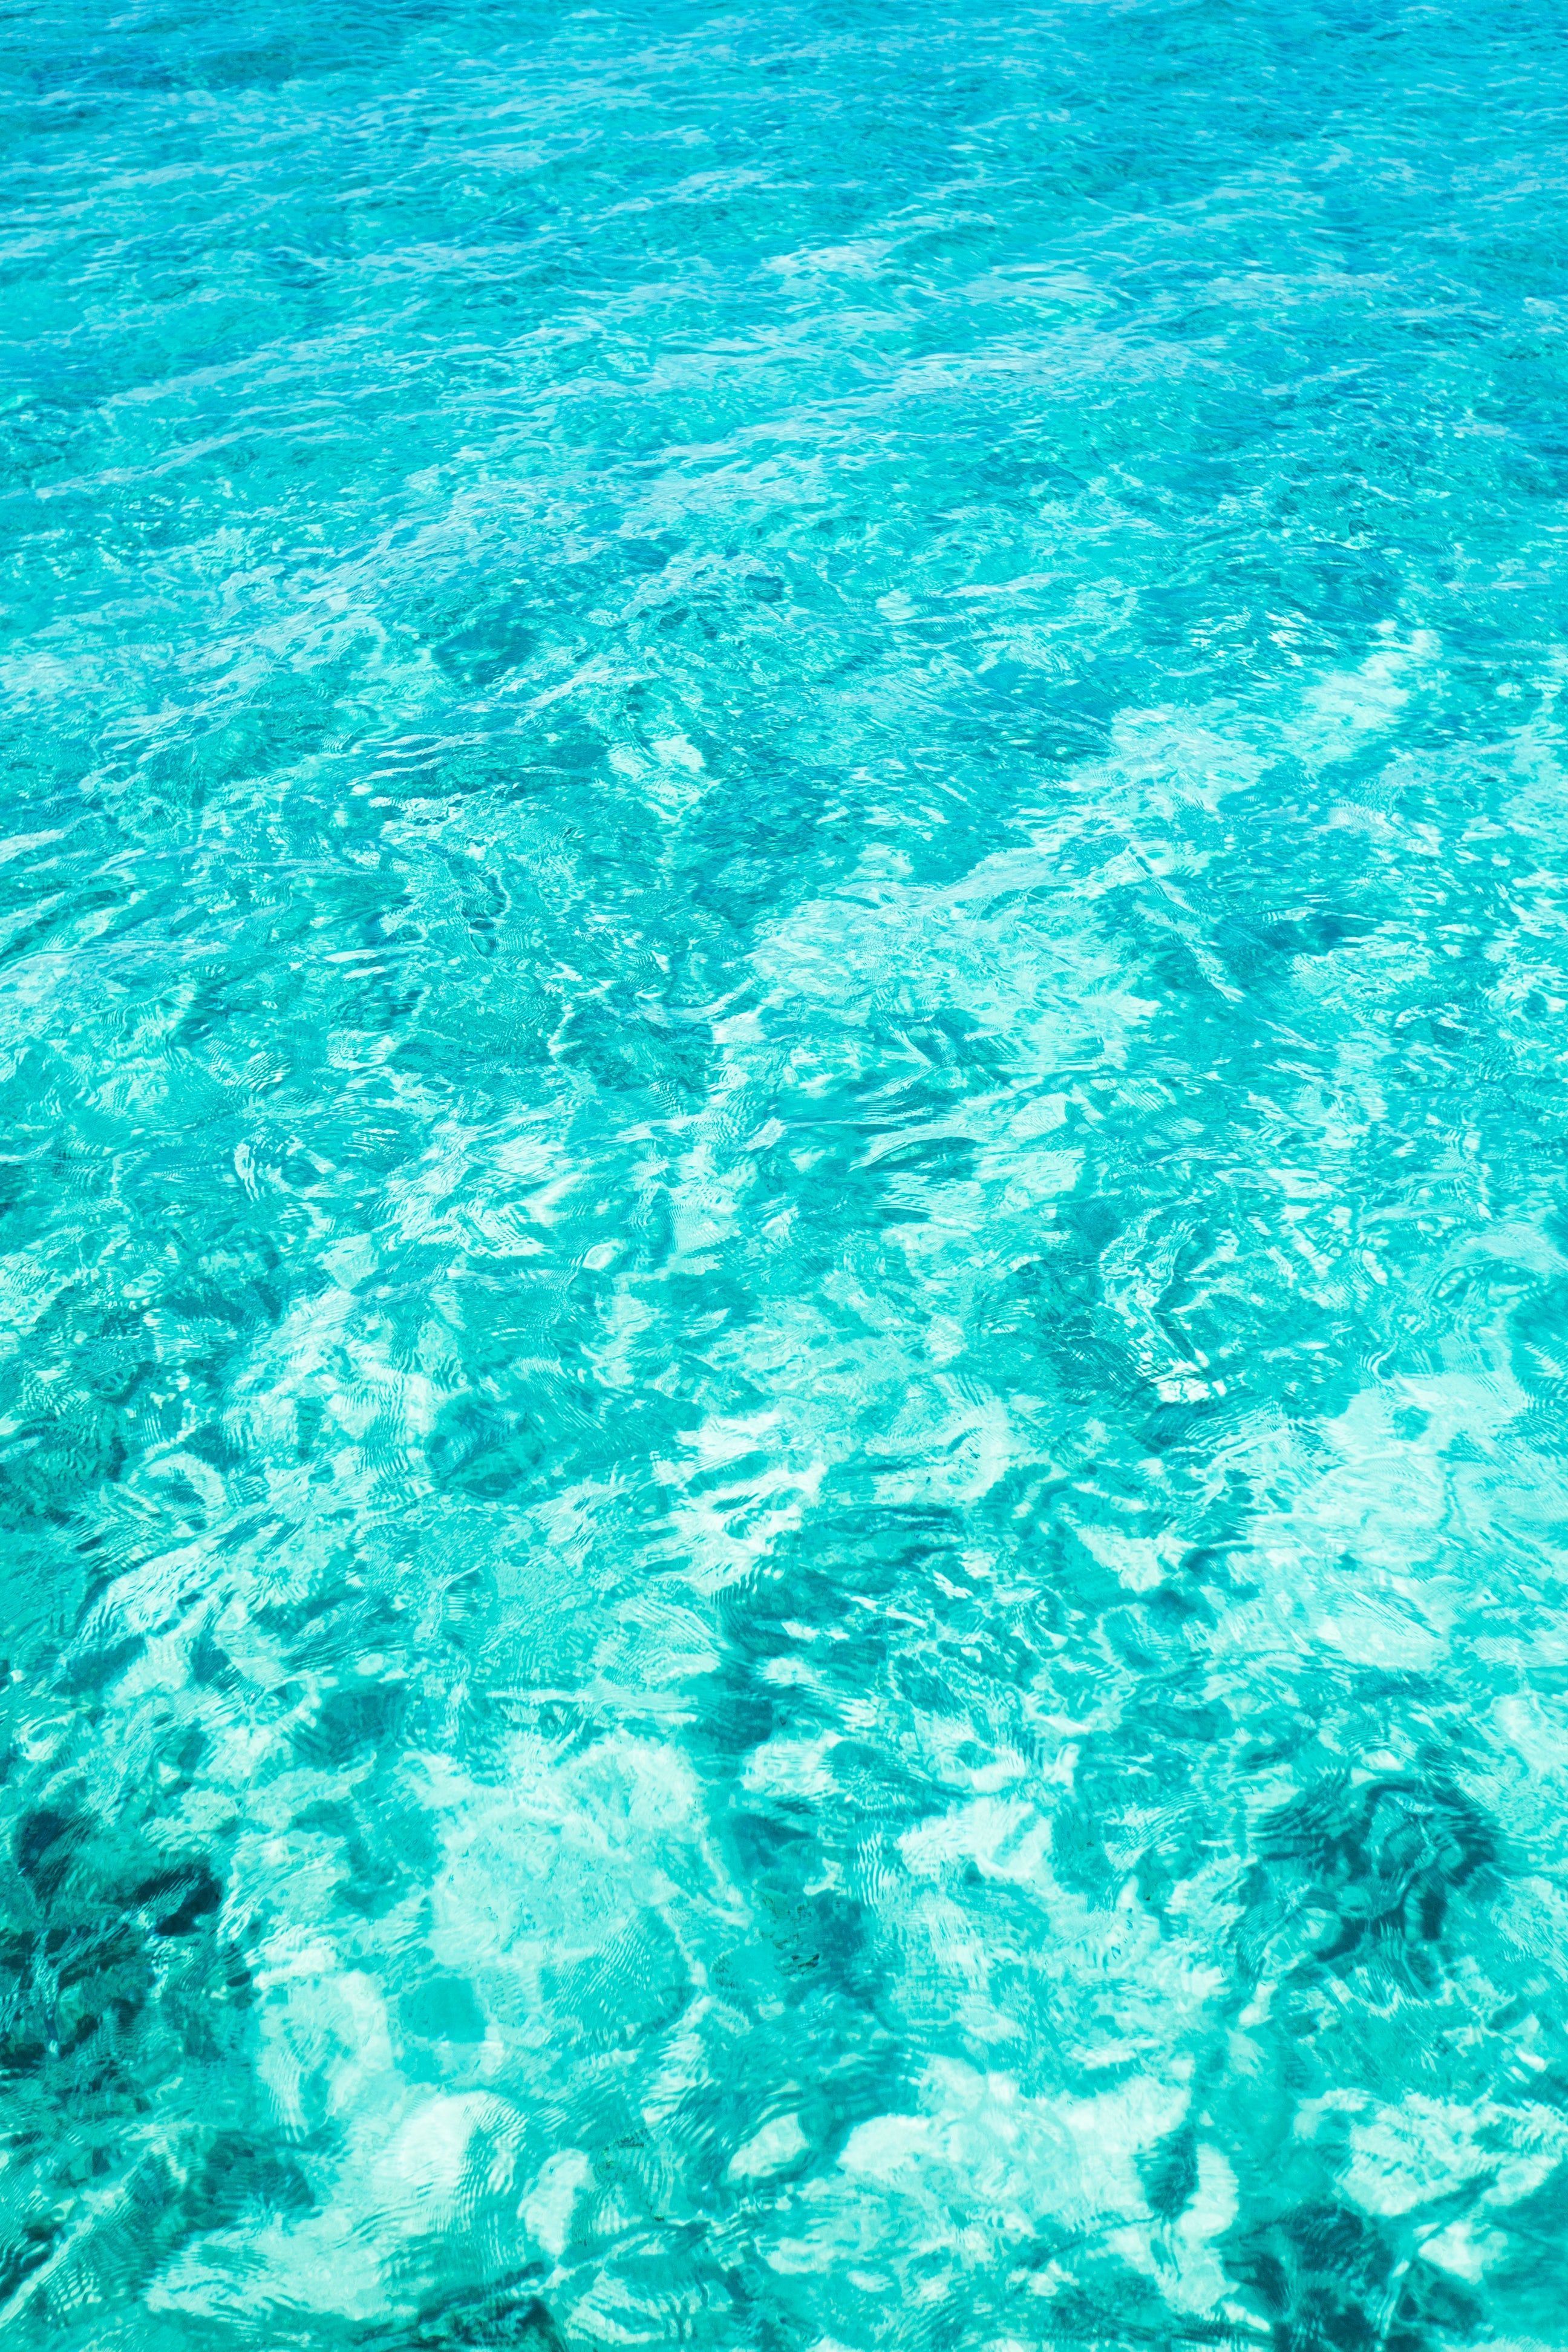 The clear blue water of a beach - Turquoise